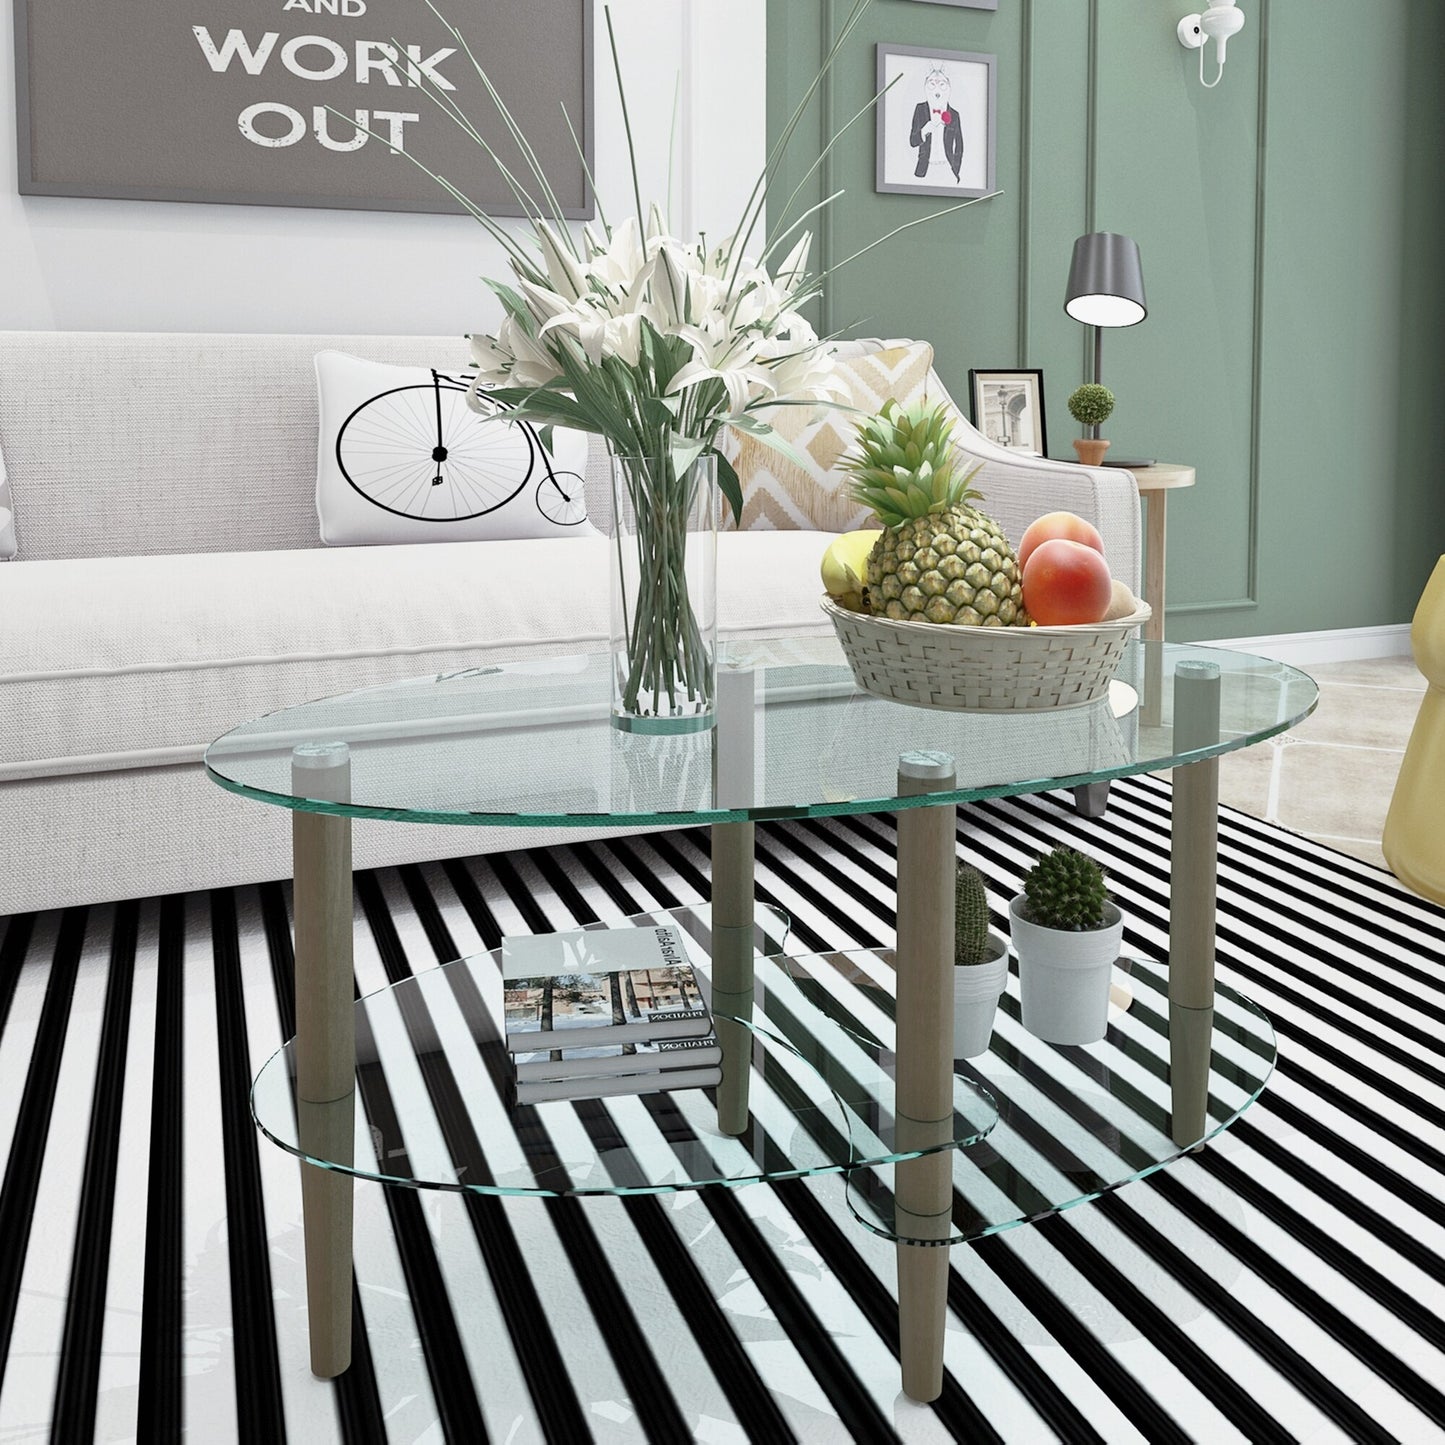 Transparent Oval Glass Coffee Table End Table, Modern Table in Living Room Oak Wood Leg Tea Table 3-layer Glass Table